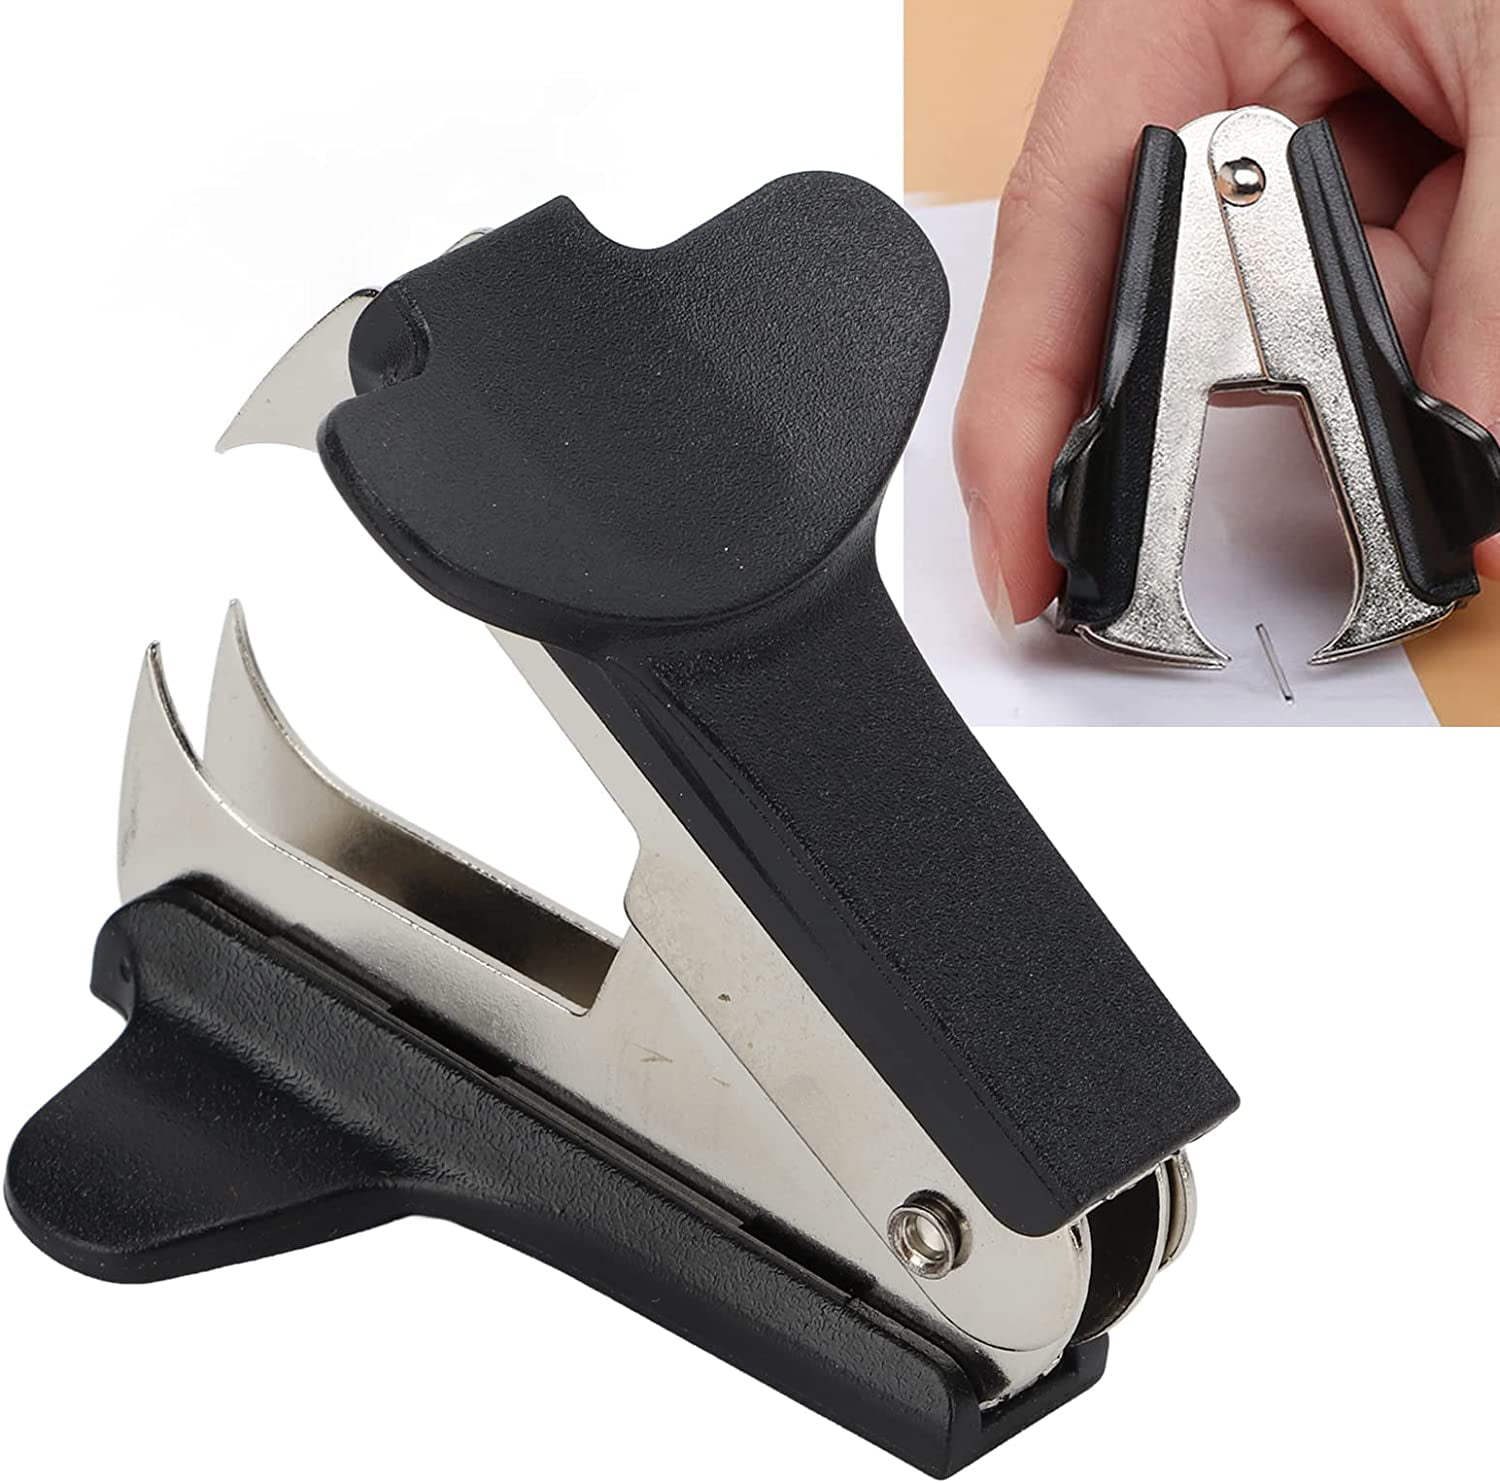 Staple Remover Portable Mini Black Staple Puller Pinch Jaw Style